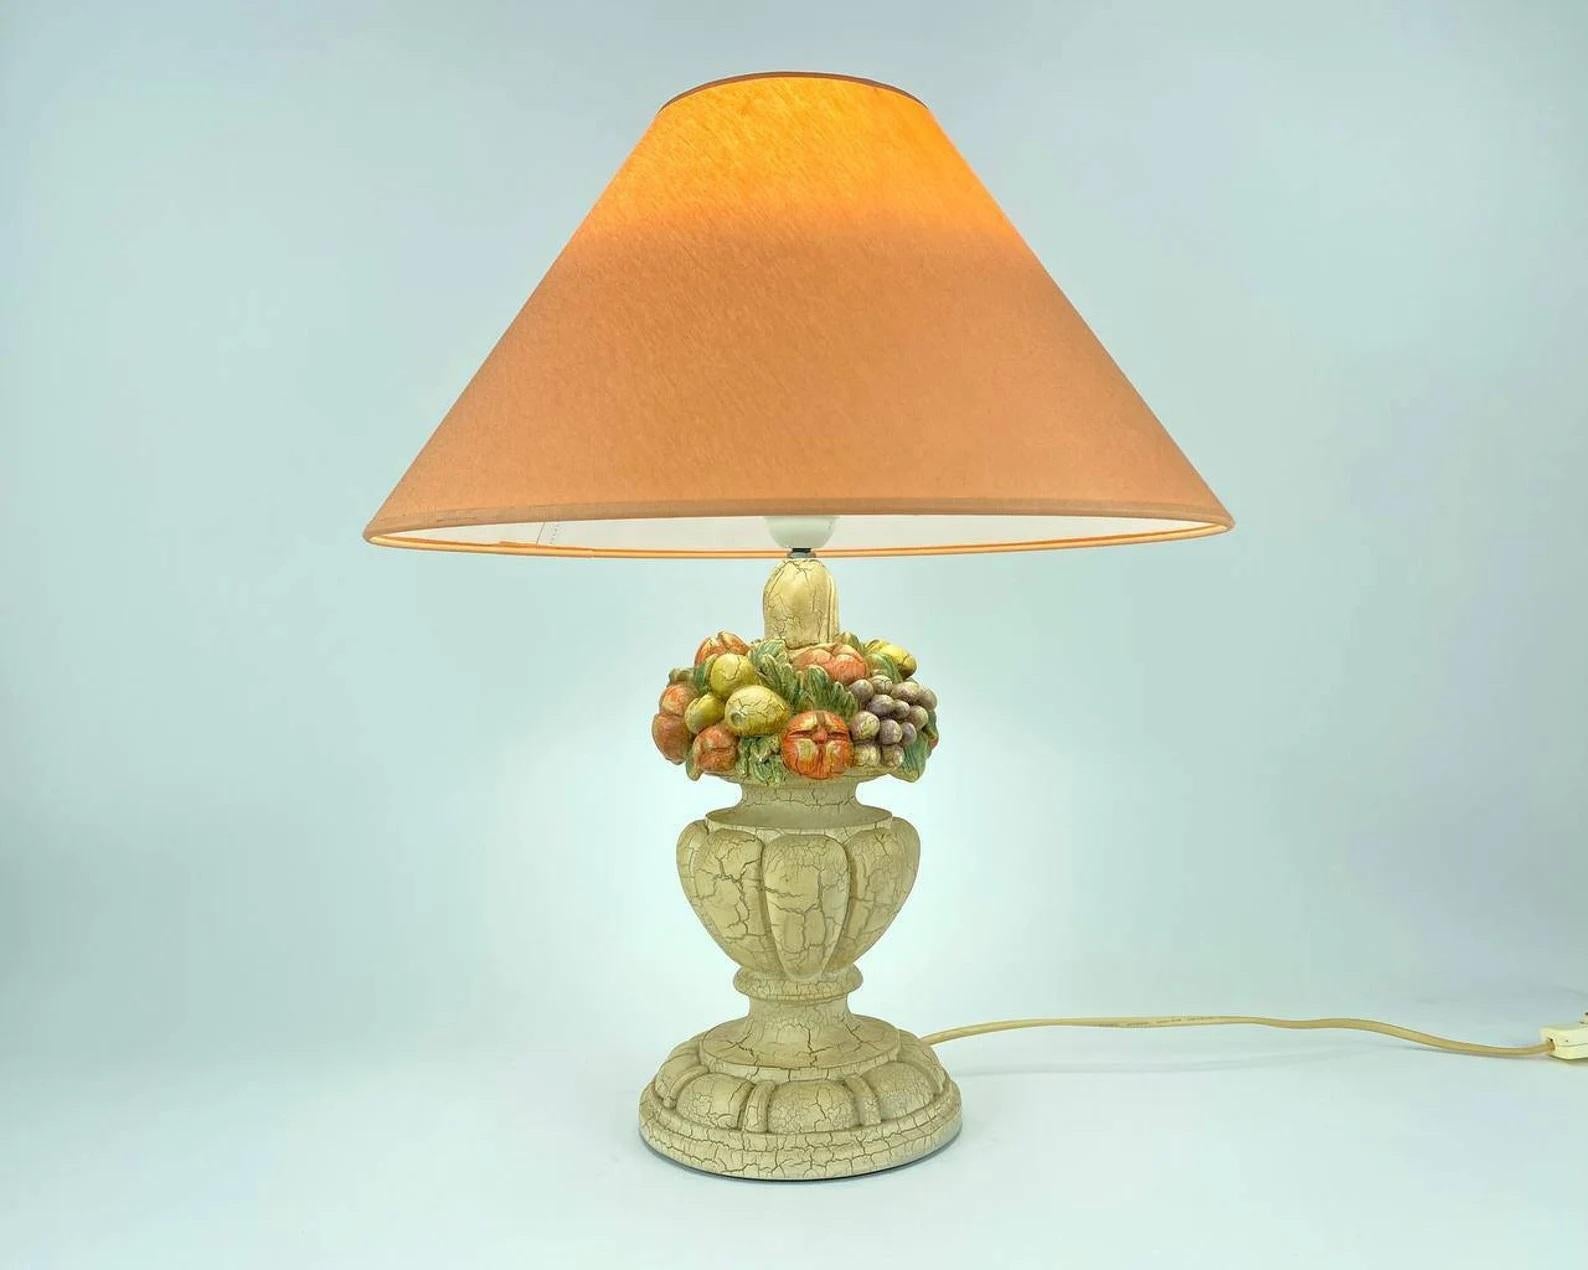 Beautiful Italian table lamp. Prism Arte Manufactory. 1980s'.

Italian style resin table lamp with colorful fruits on the Ivory colored pedestal. Large fabric orange lampshade gives the lamp even more charm!

Whether placed in the bedroom or the